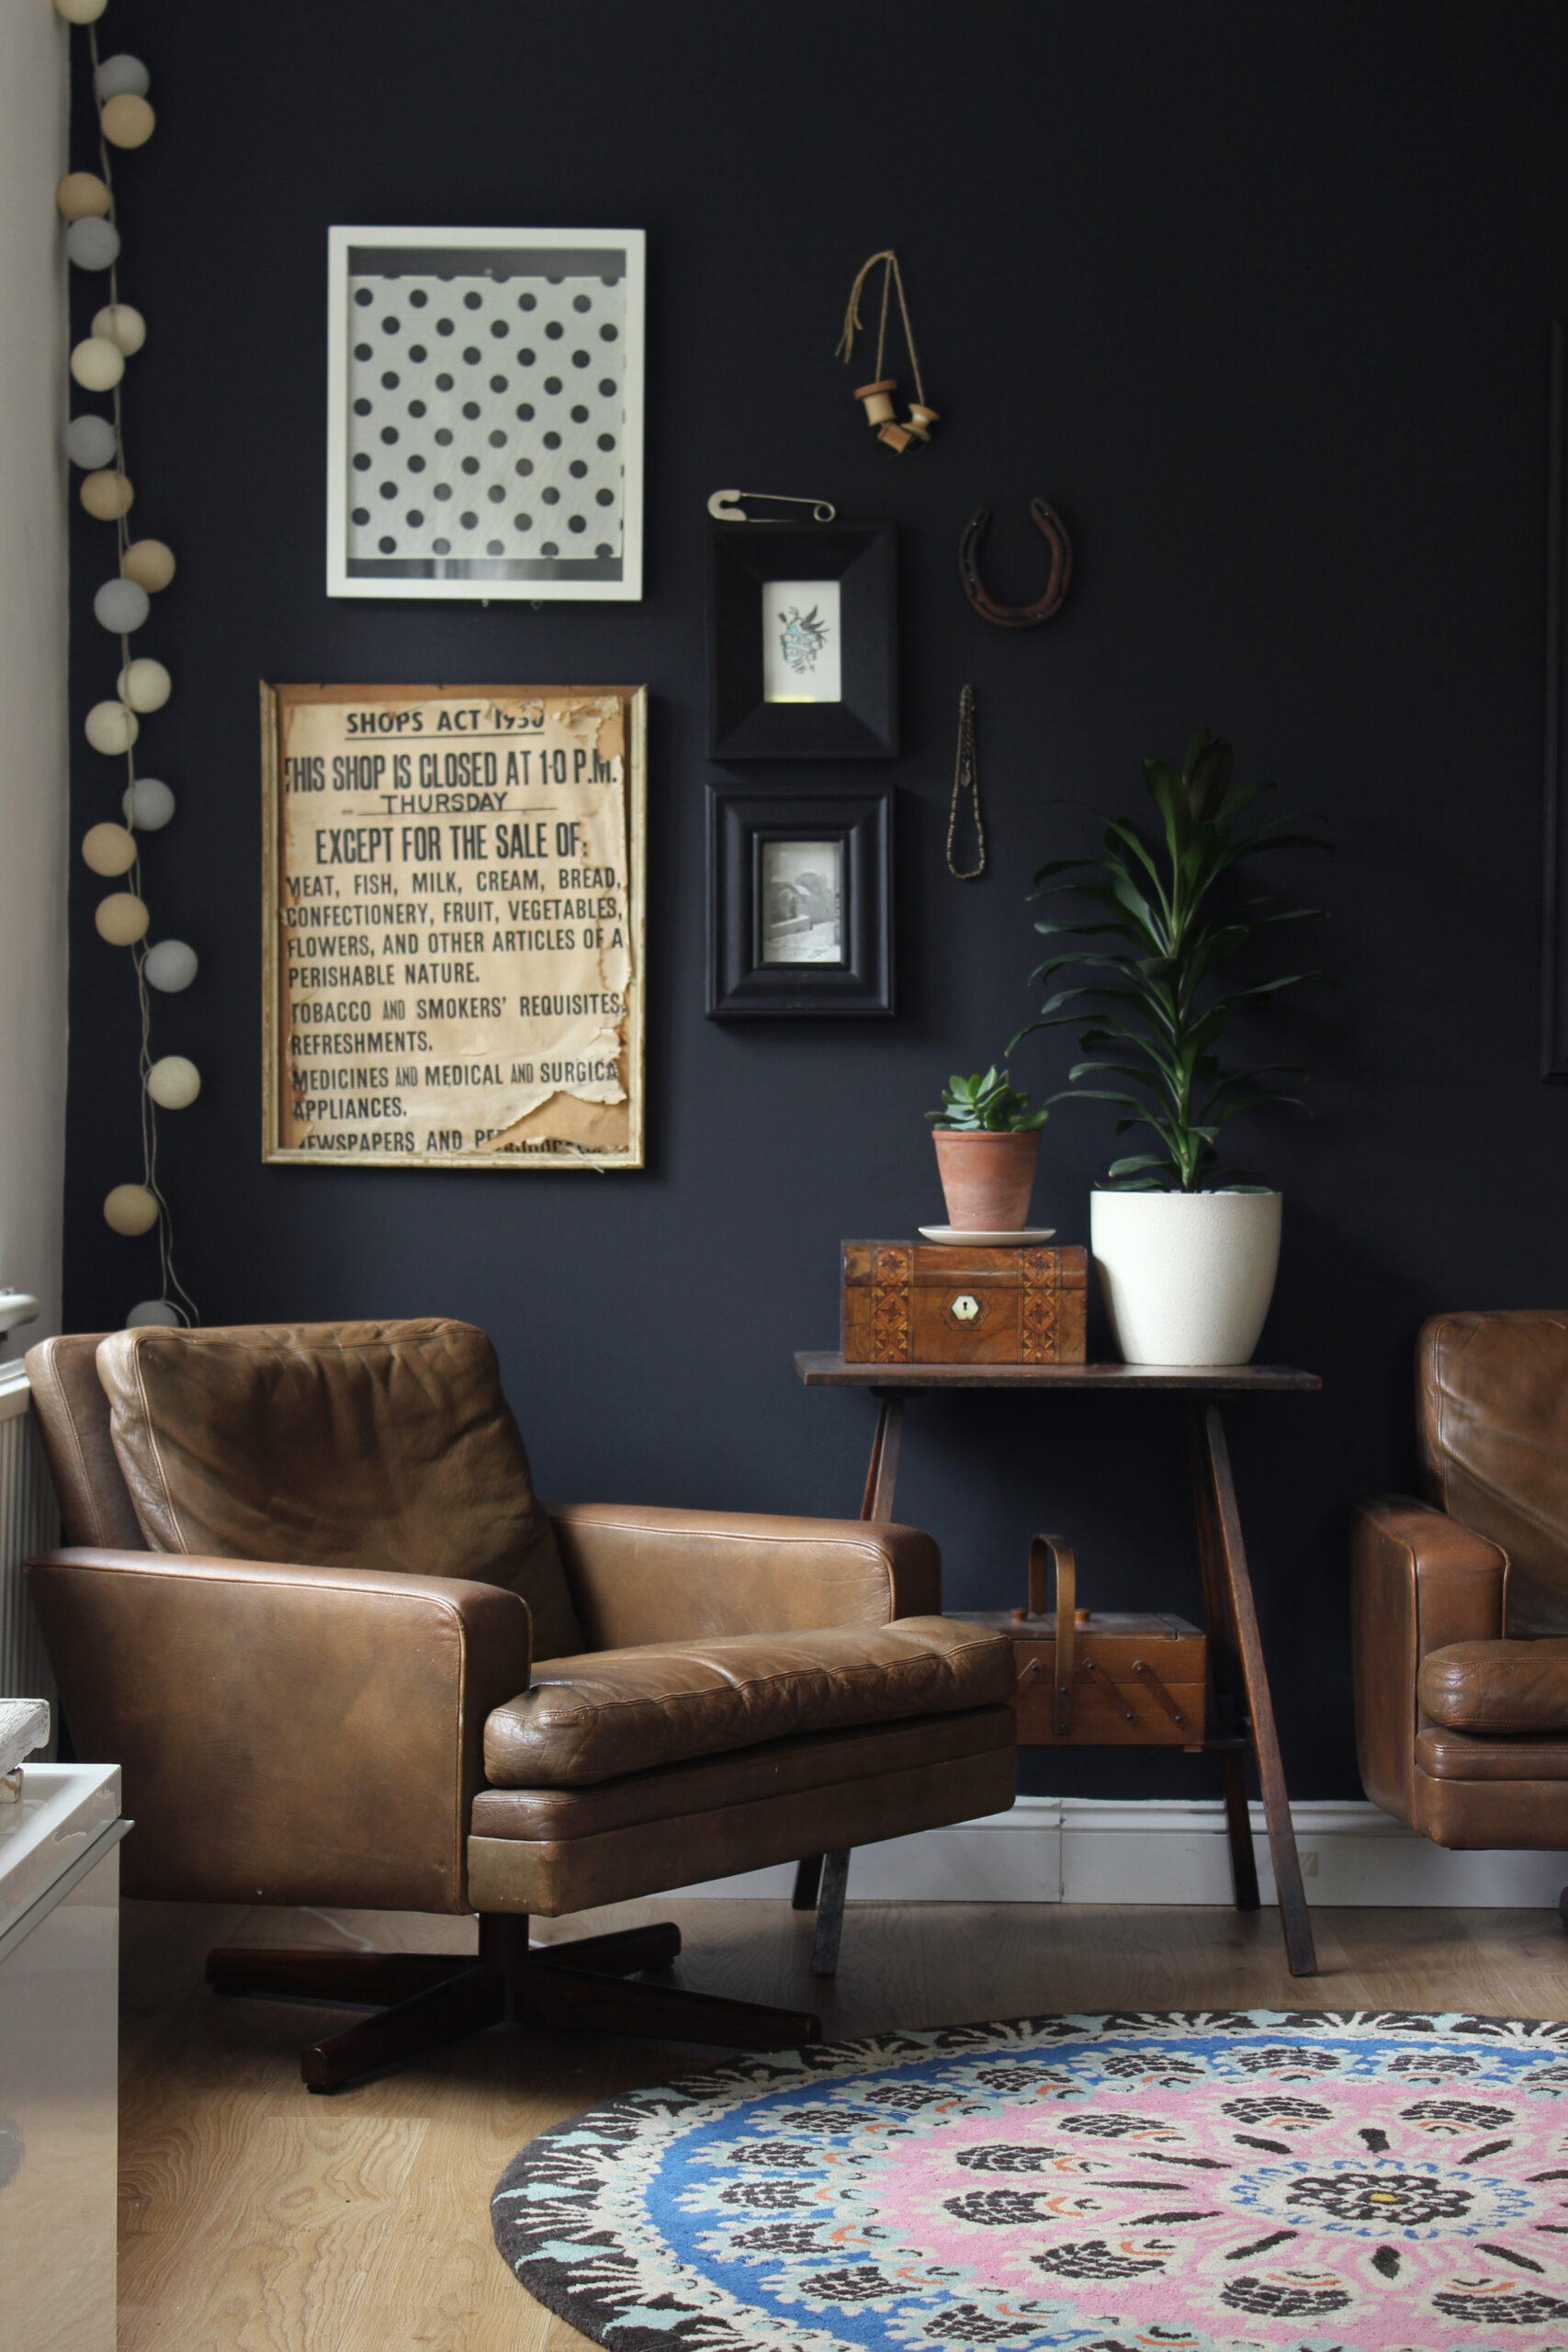 Impulsive decorating: our black living room wall